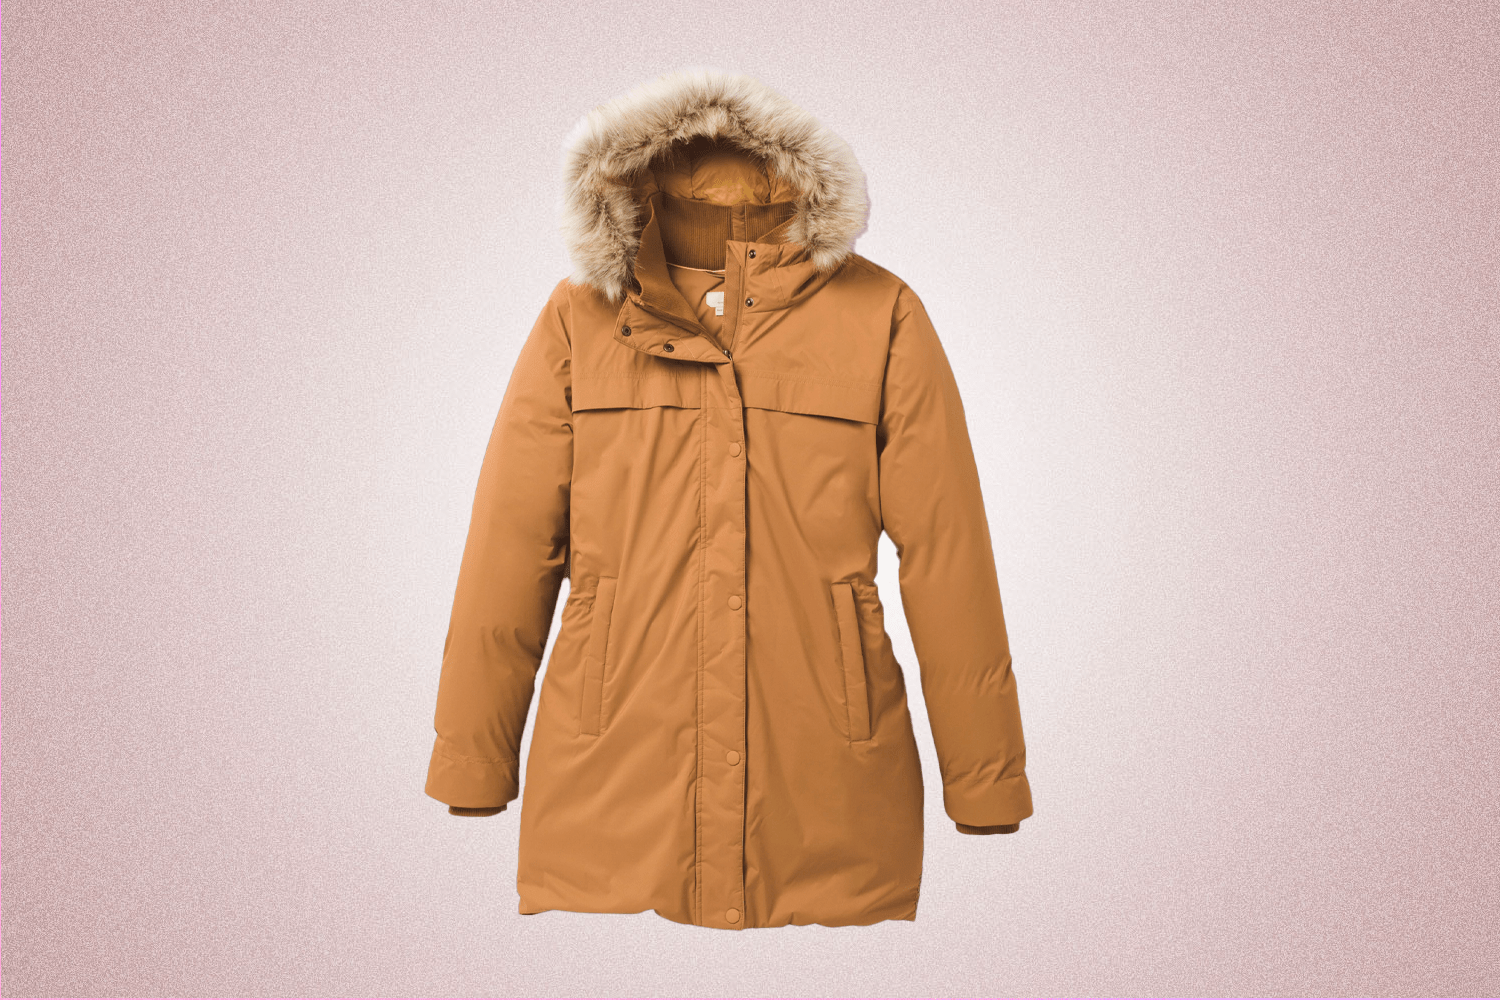 A long tan parka jacket with a fur good from Prana, a perfect Valentine’s Day gift for 2022, on a pink background.